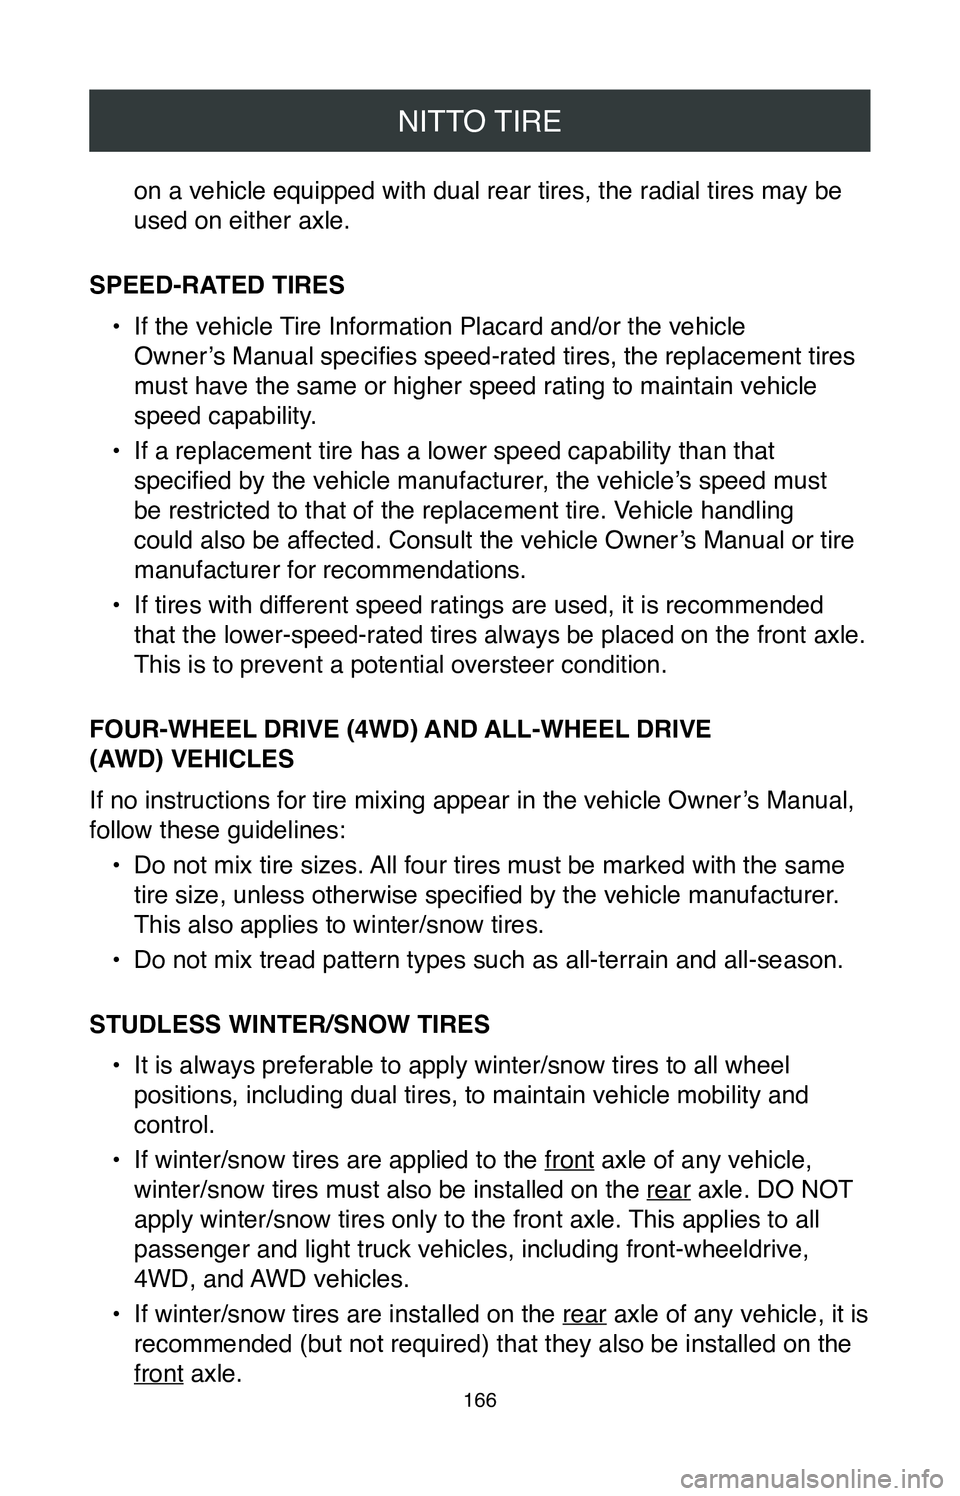 TOYOTA MIRAI 2020  Warranties & Maintenance Guides (in English) NITTO TIRE
166
on a vehicle equipped with dual rear tires, the radial tires may be 
used on either axle.
SPEED-RATED TIRES •
 If the vehicle Tire Information Placard and/or the vehicle  
Owner’s M